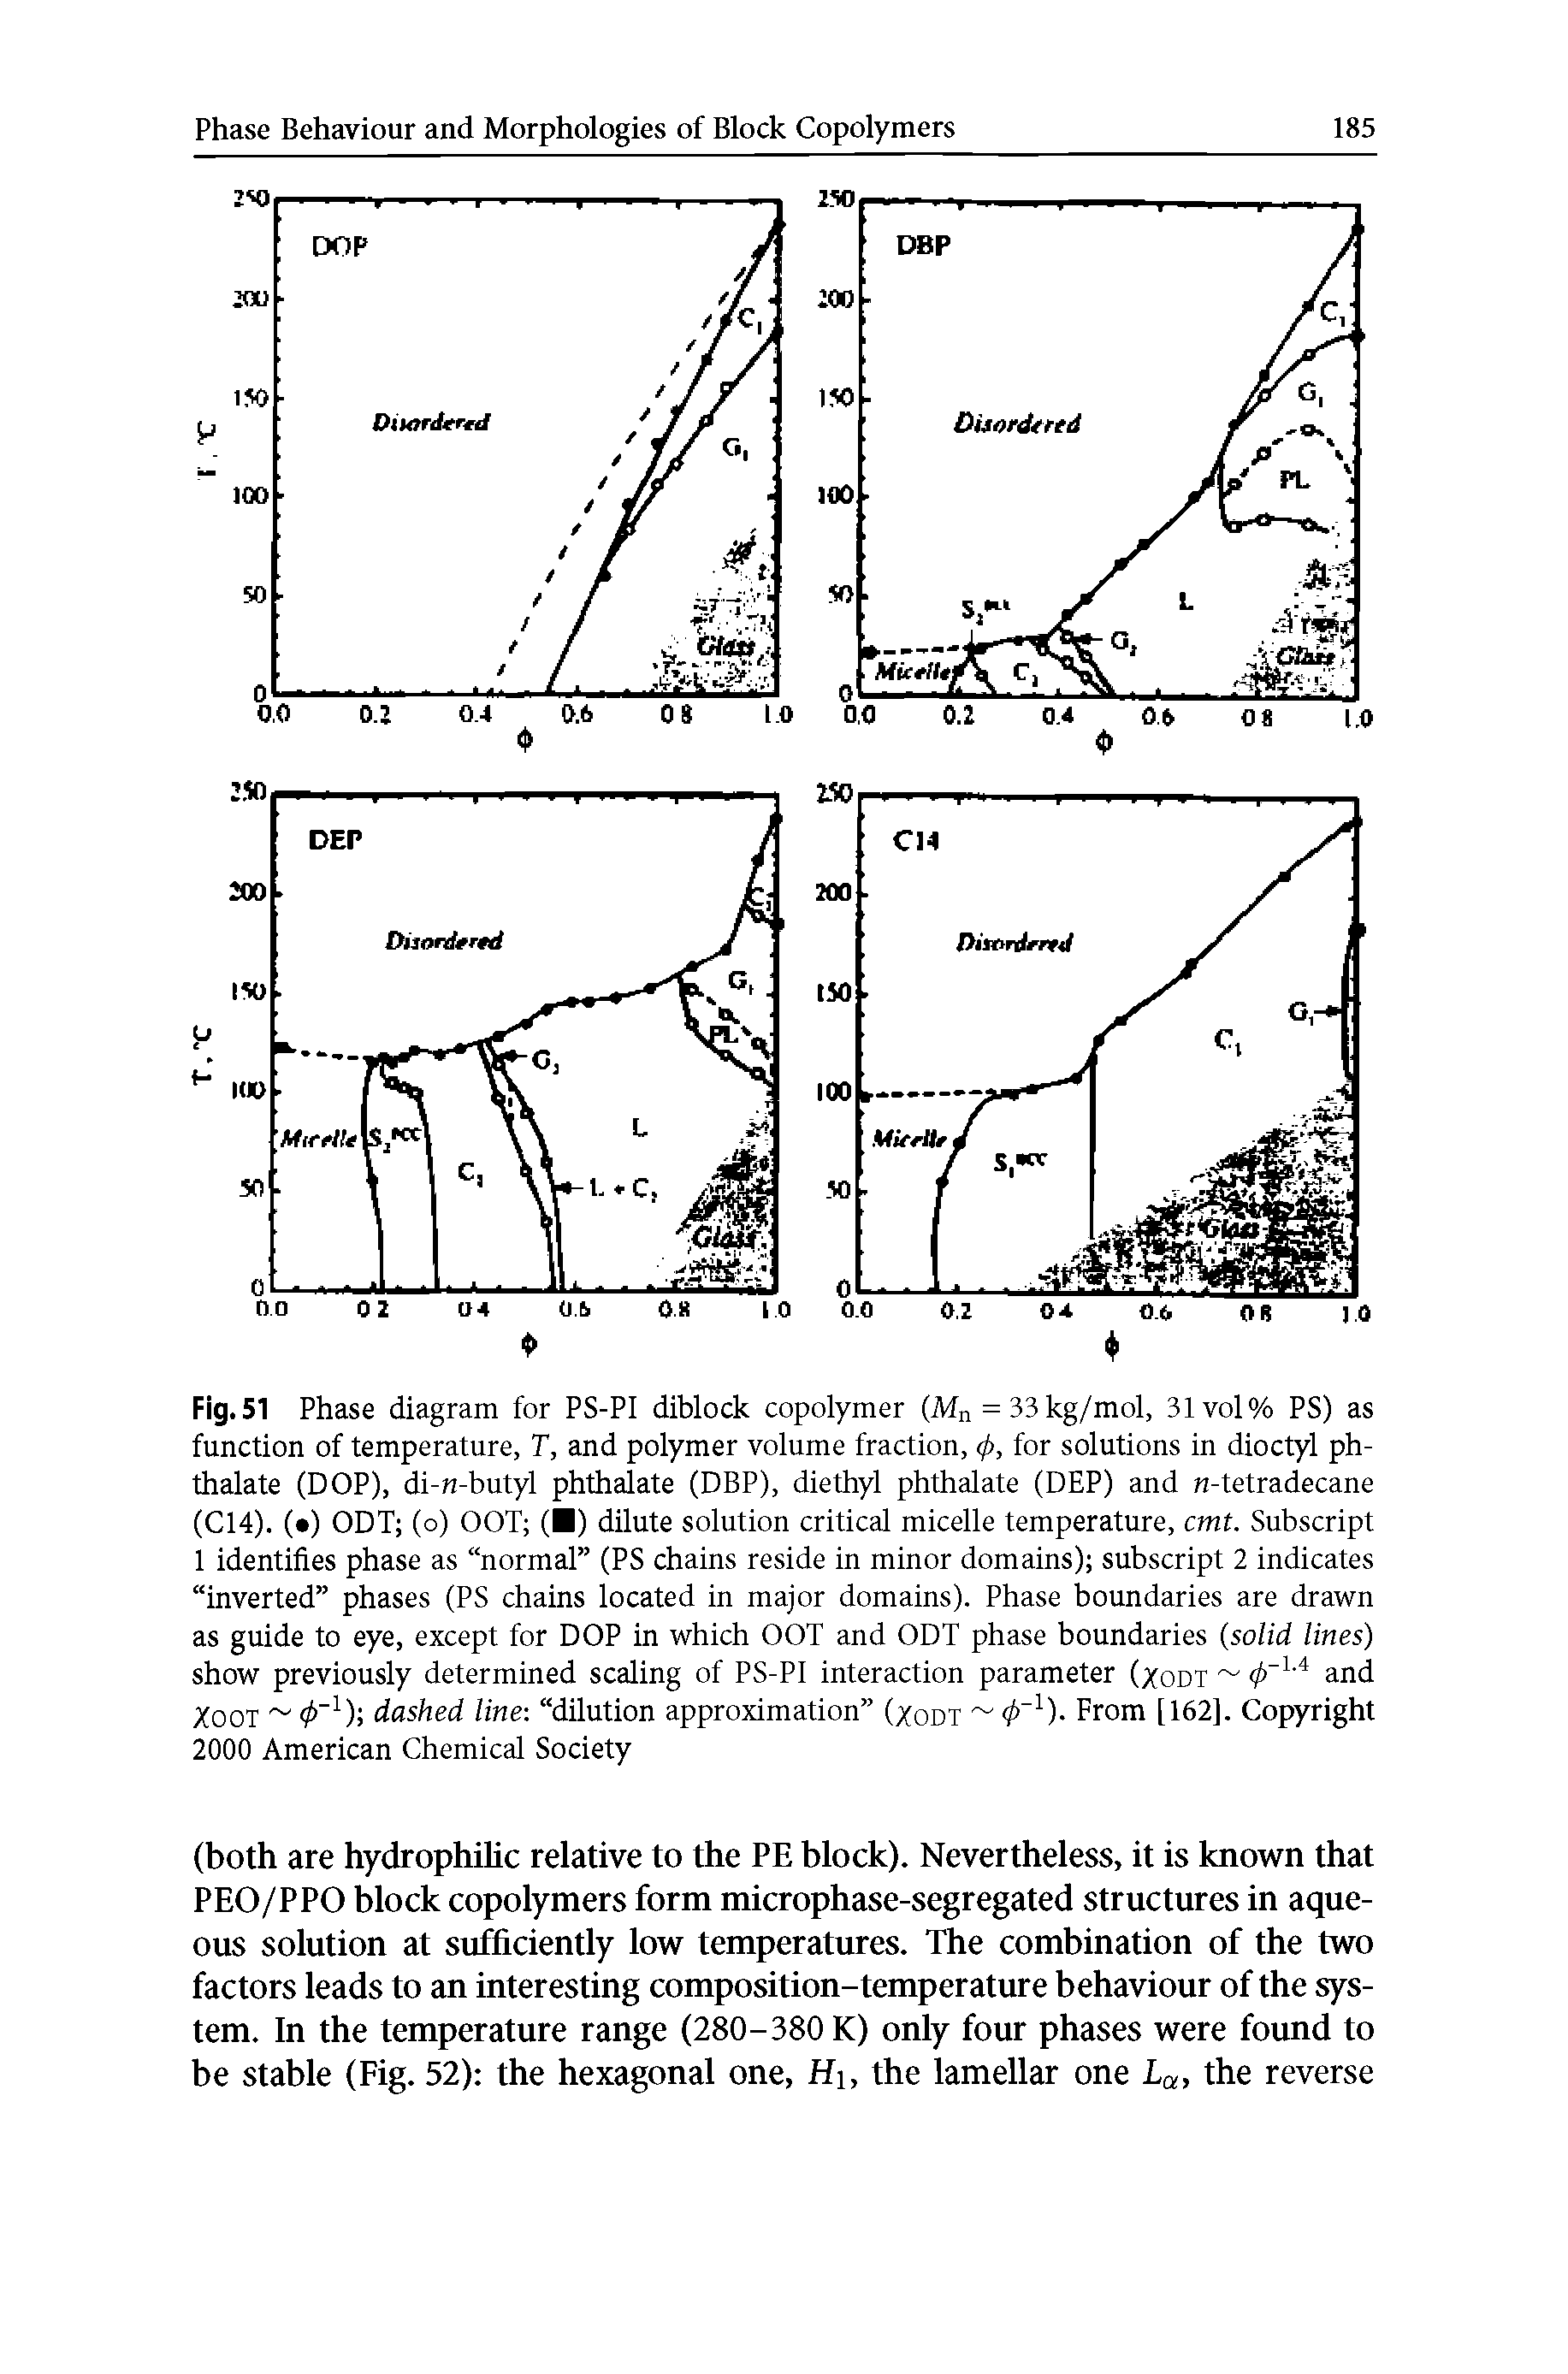 Fig. 51 Phase diagram for PS-PI diblock copolymer (Mn = 33 kg/mol, 31vol% PS) as function of temperature, T, and polymer volume fraction, cp, for solutions in dioctyl ph-thalate (DOP), di-n-butyl phthalate (DBP), diethyl phthalate (DEP) and M-tetradecane (C14). ( ) ODT (o) OOT ( ) dilute solution critical micelle temperature, cmt. Subscript 1 identifies phase as normal (PS chains reside in minor domains) subscript 2 indicates inverted phases (PS chains located in major domains). Phase boundaries are drawn as guide to eye, except for DOP in which OOT and ODT phase boundaries (solid lines) show previously determined scaling of PS-PI interaction parameter (xodt <P 1A and /OOT 0"1) dashed line dilution approximation (/odt From [162], Copyright 2000 American Chemical Society...